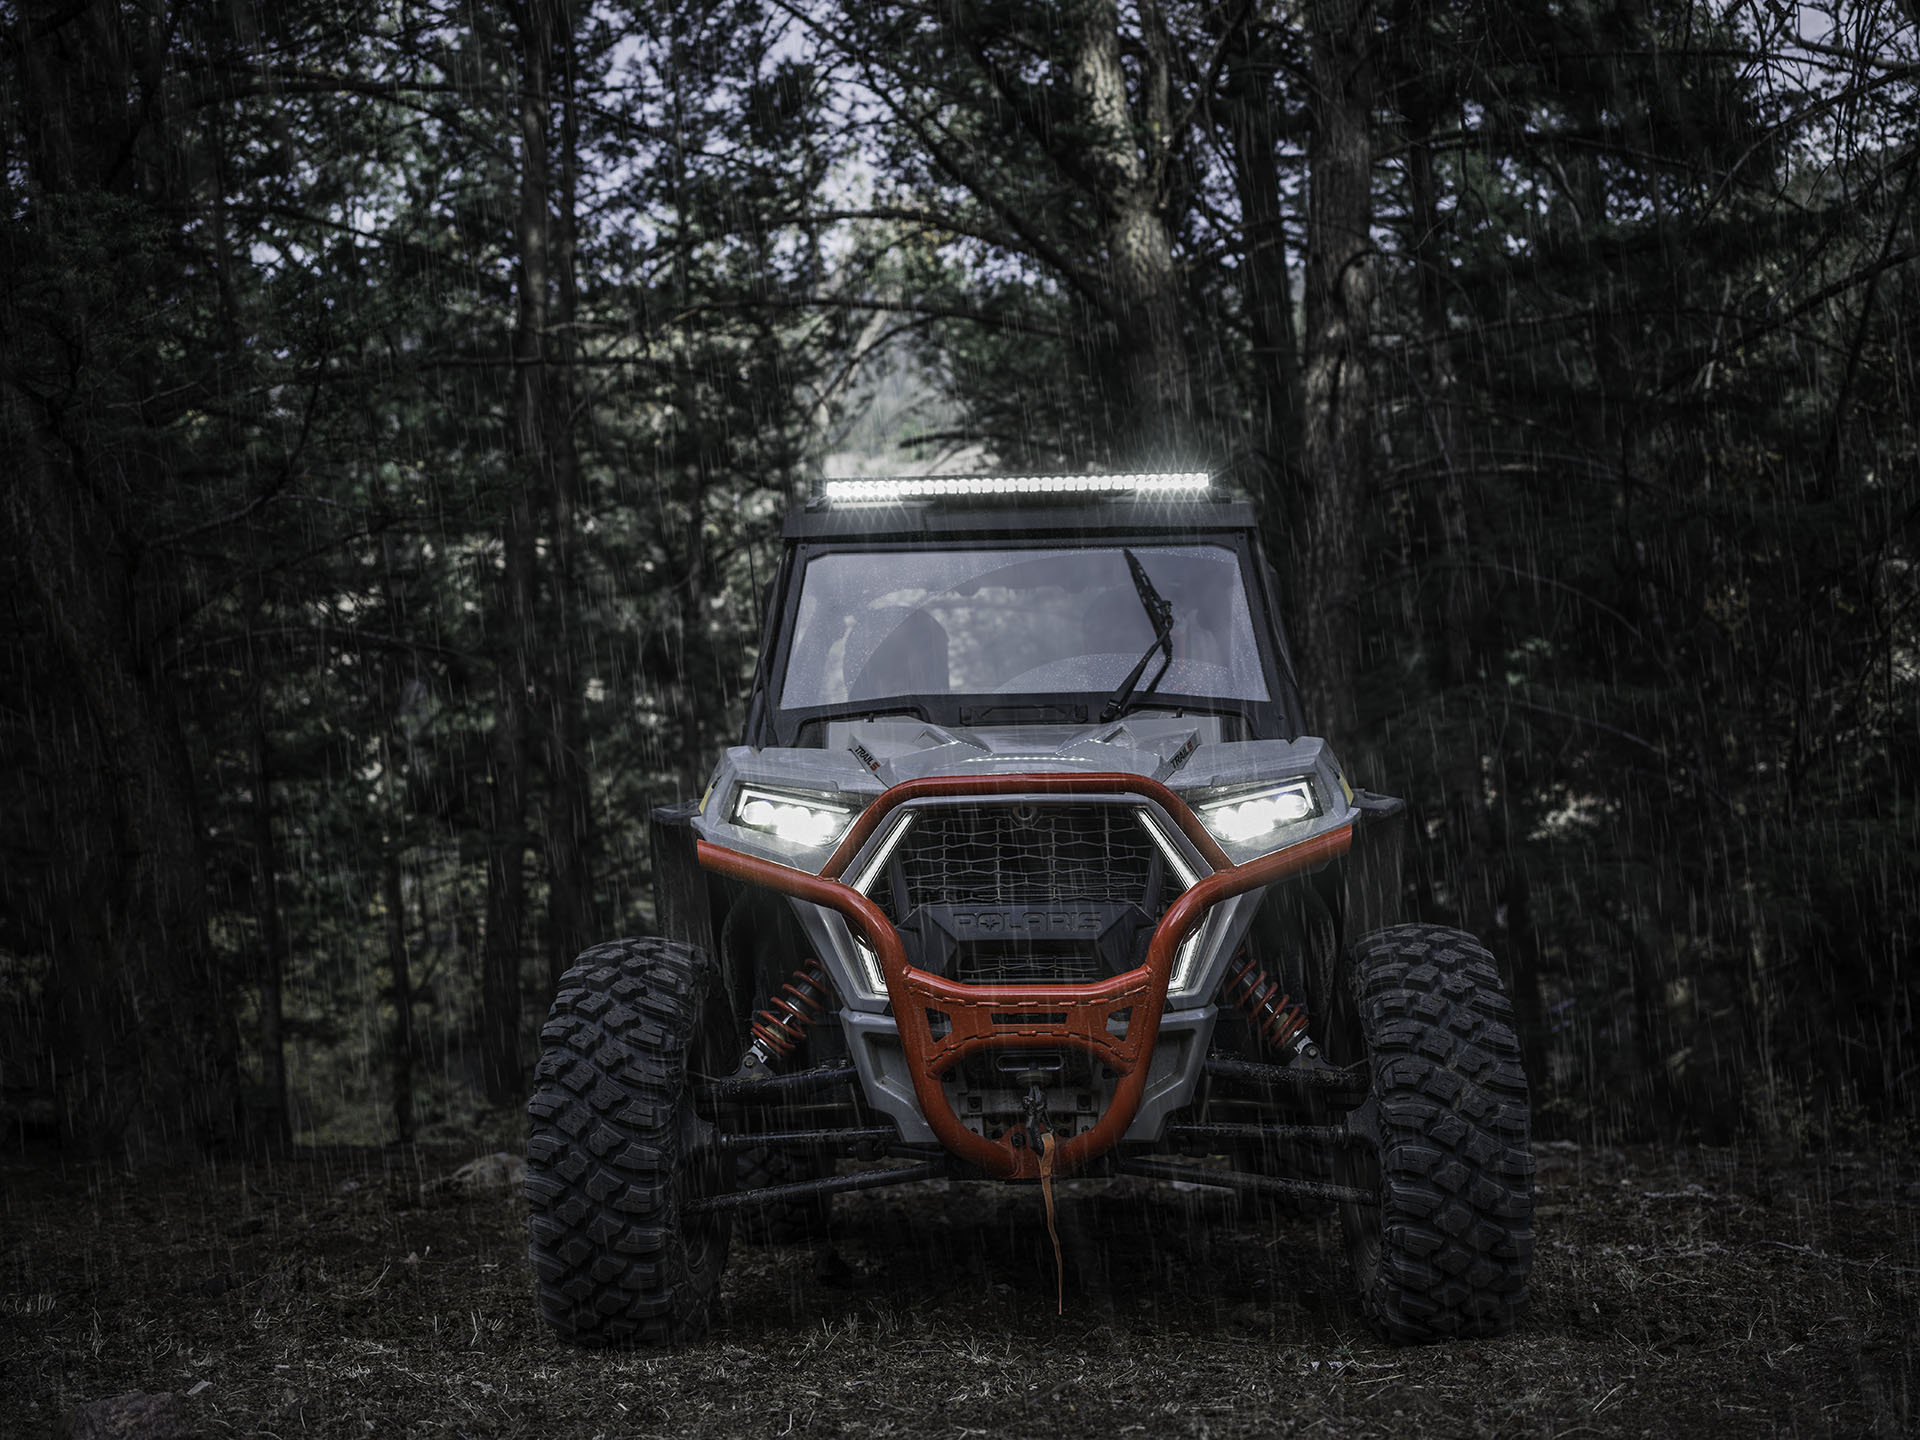 2023 Polaris RZR Trail S 1000 Ultimate in Loxley, Alabama - Photo 11